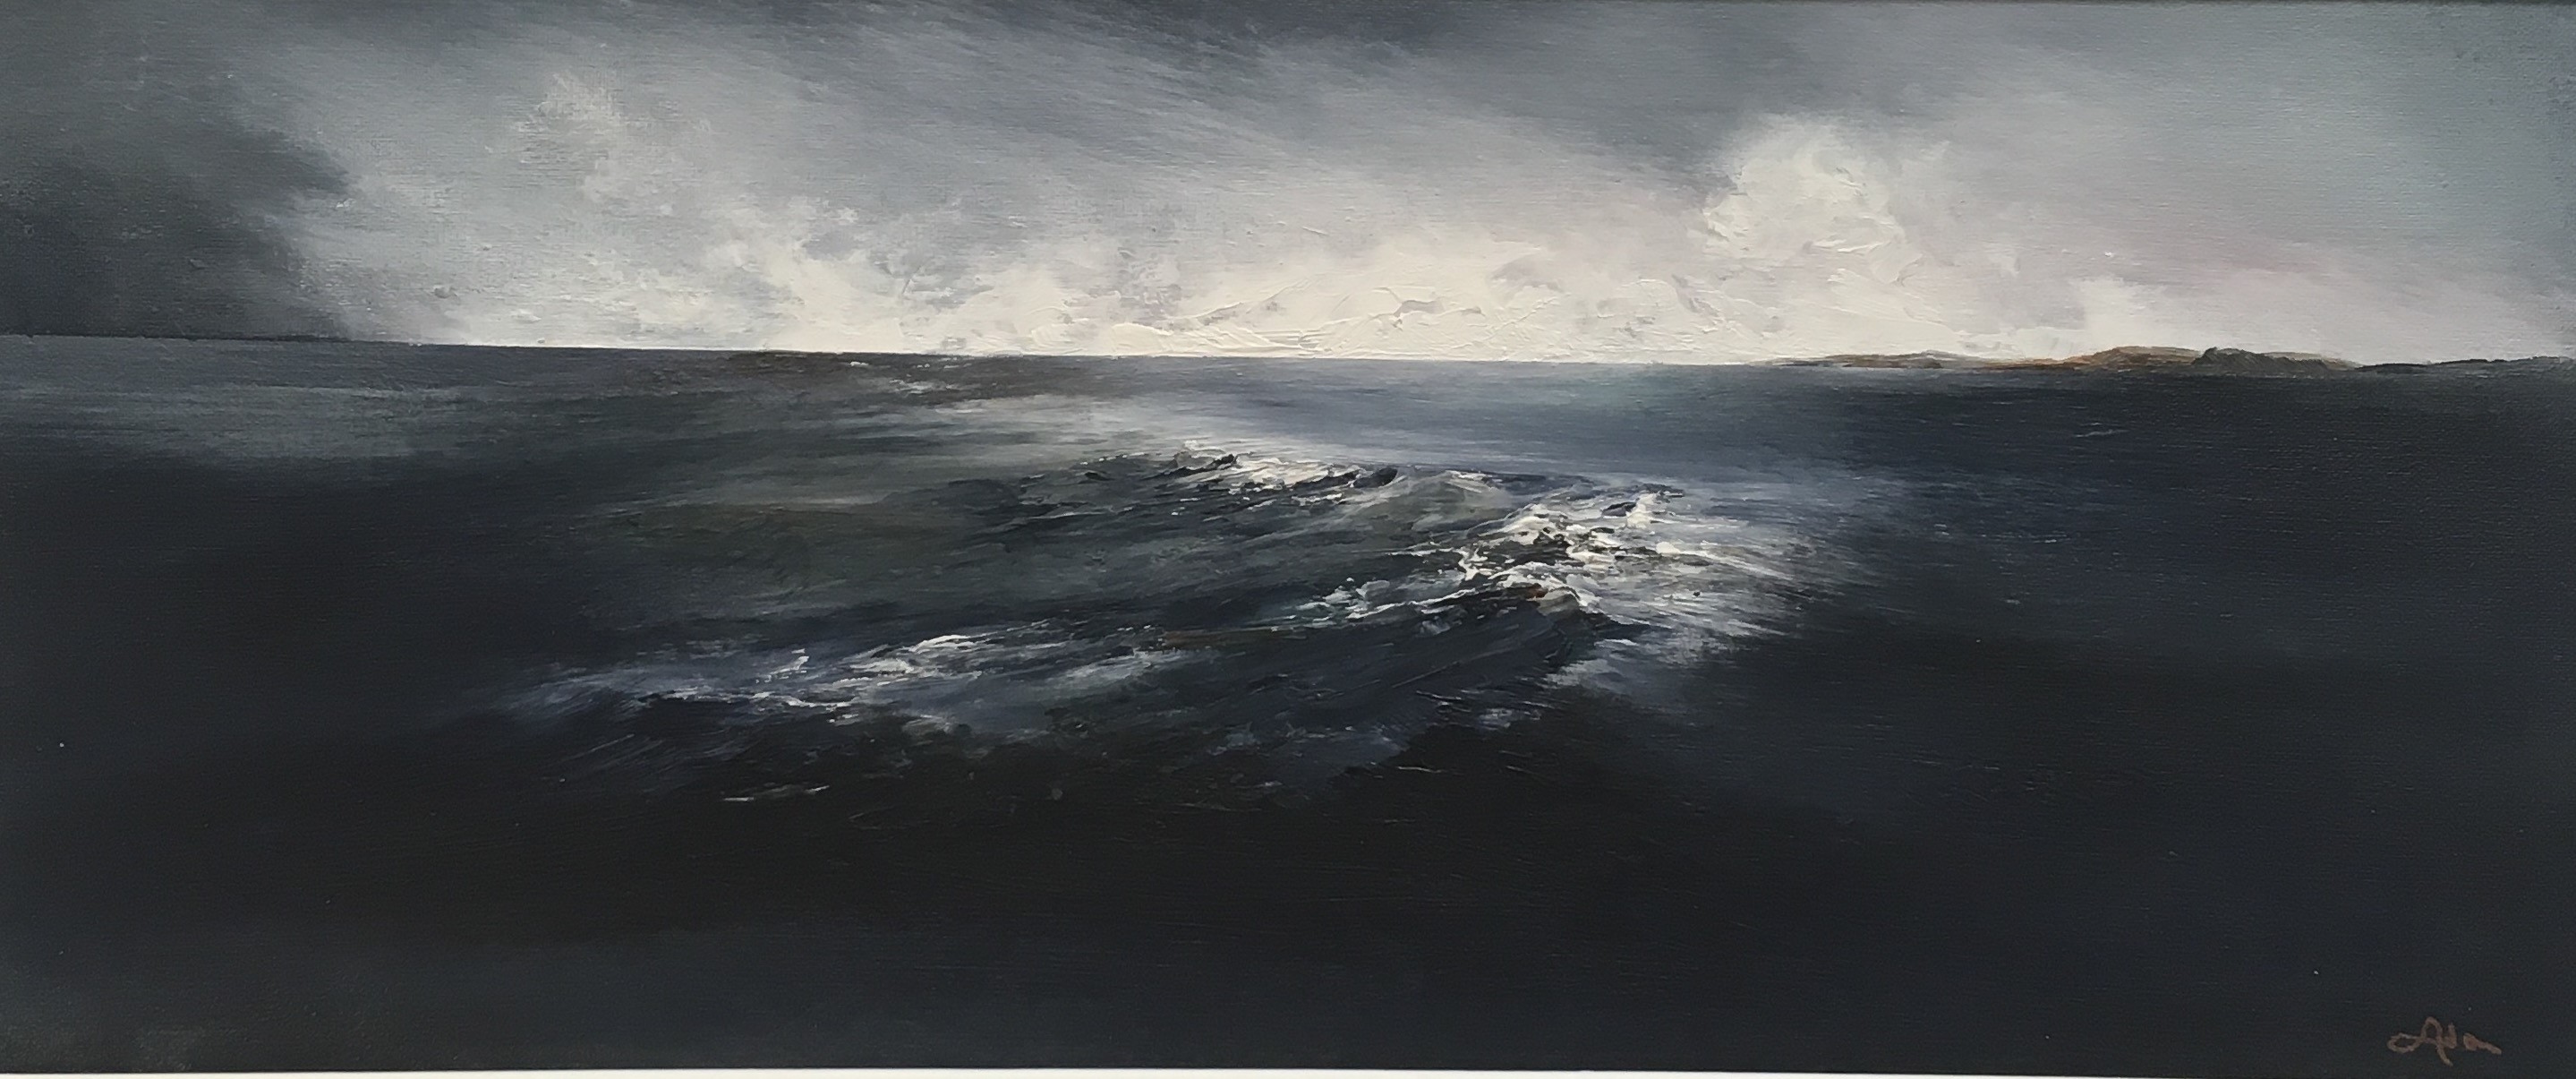 'Evening Swell, Fionnphort, Mull' by artist Alison Lyon